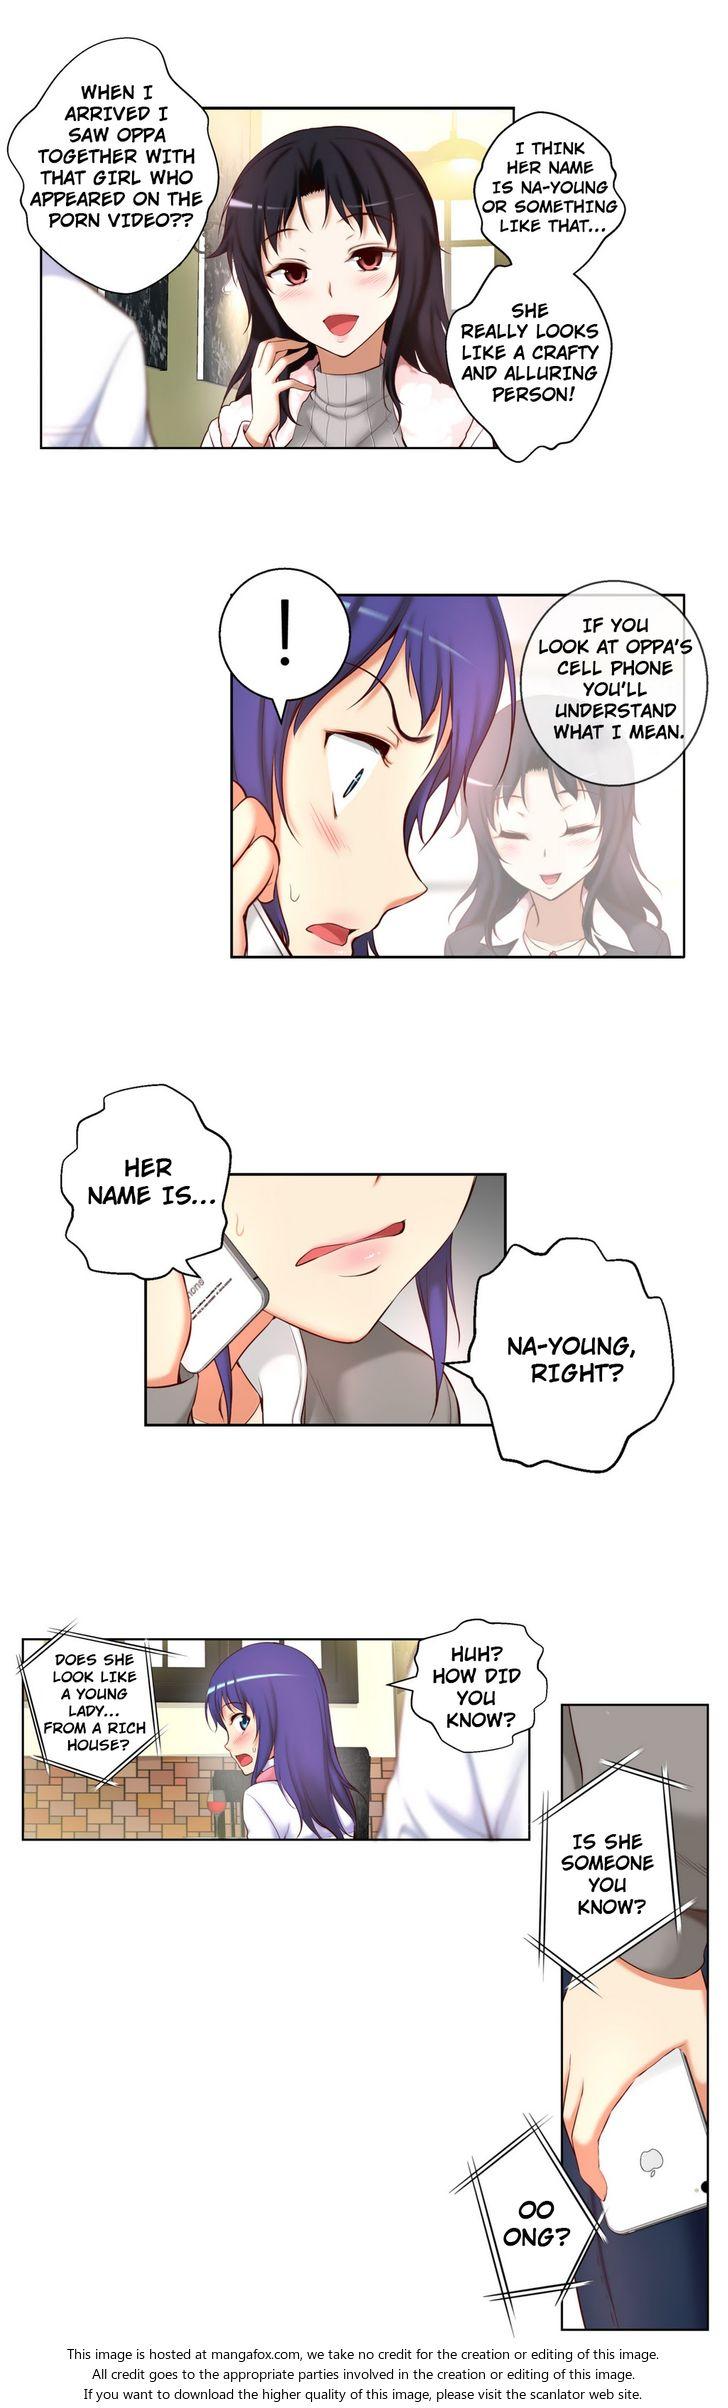 [Donggul Gom] She is Young (English) Part 1/2 729